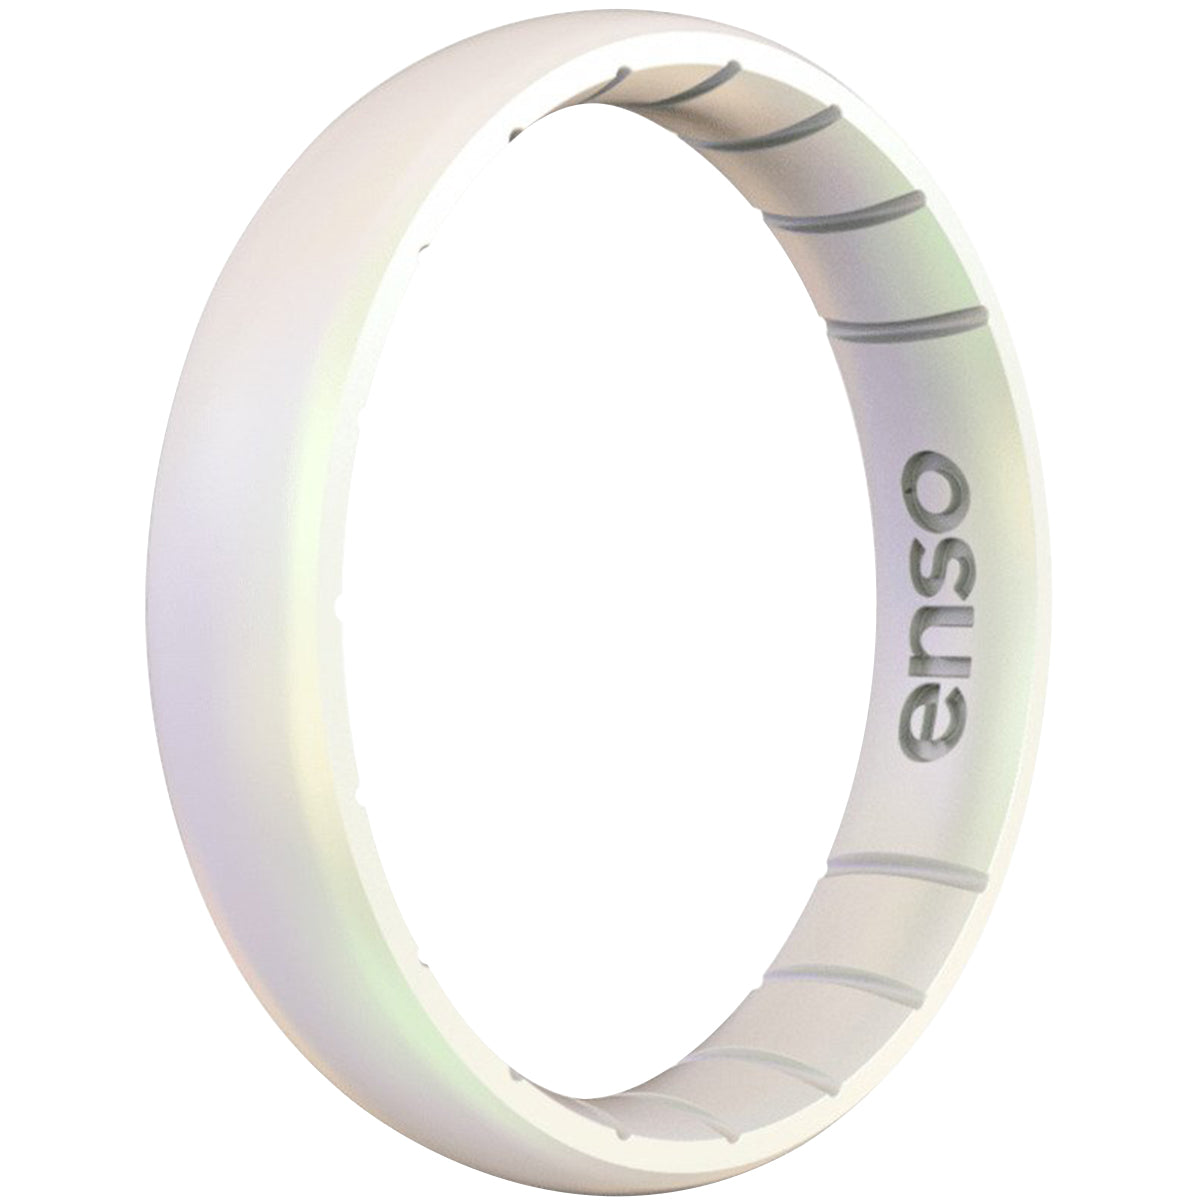 Enso Rings Thin Legends Series Silicone Ring - Unicorn Enso Rings